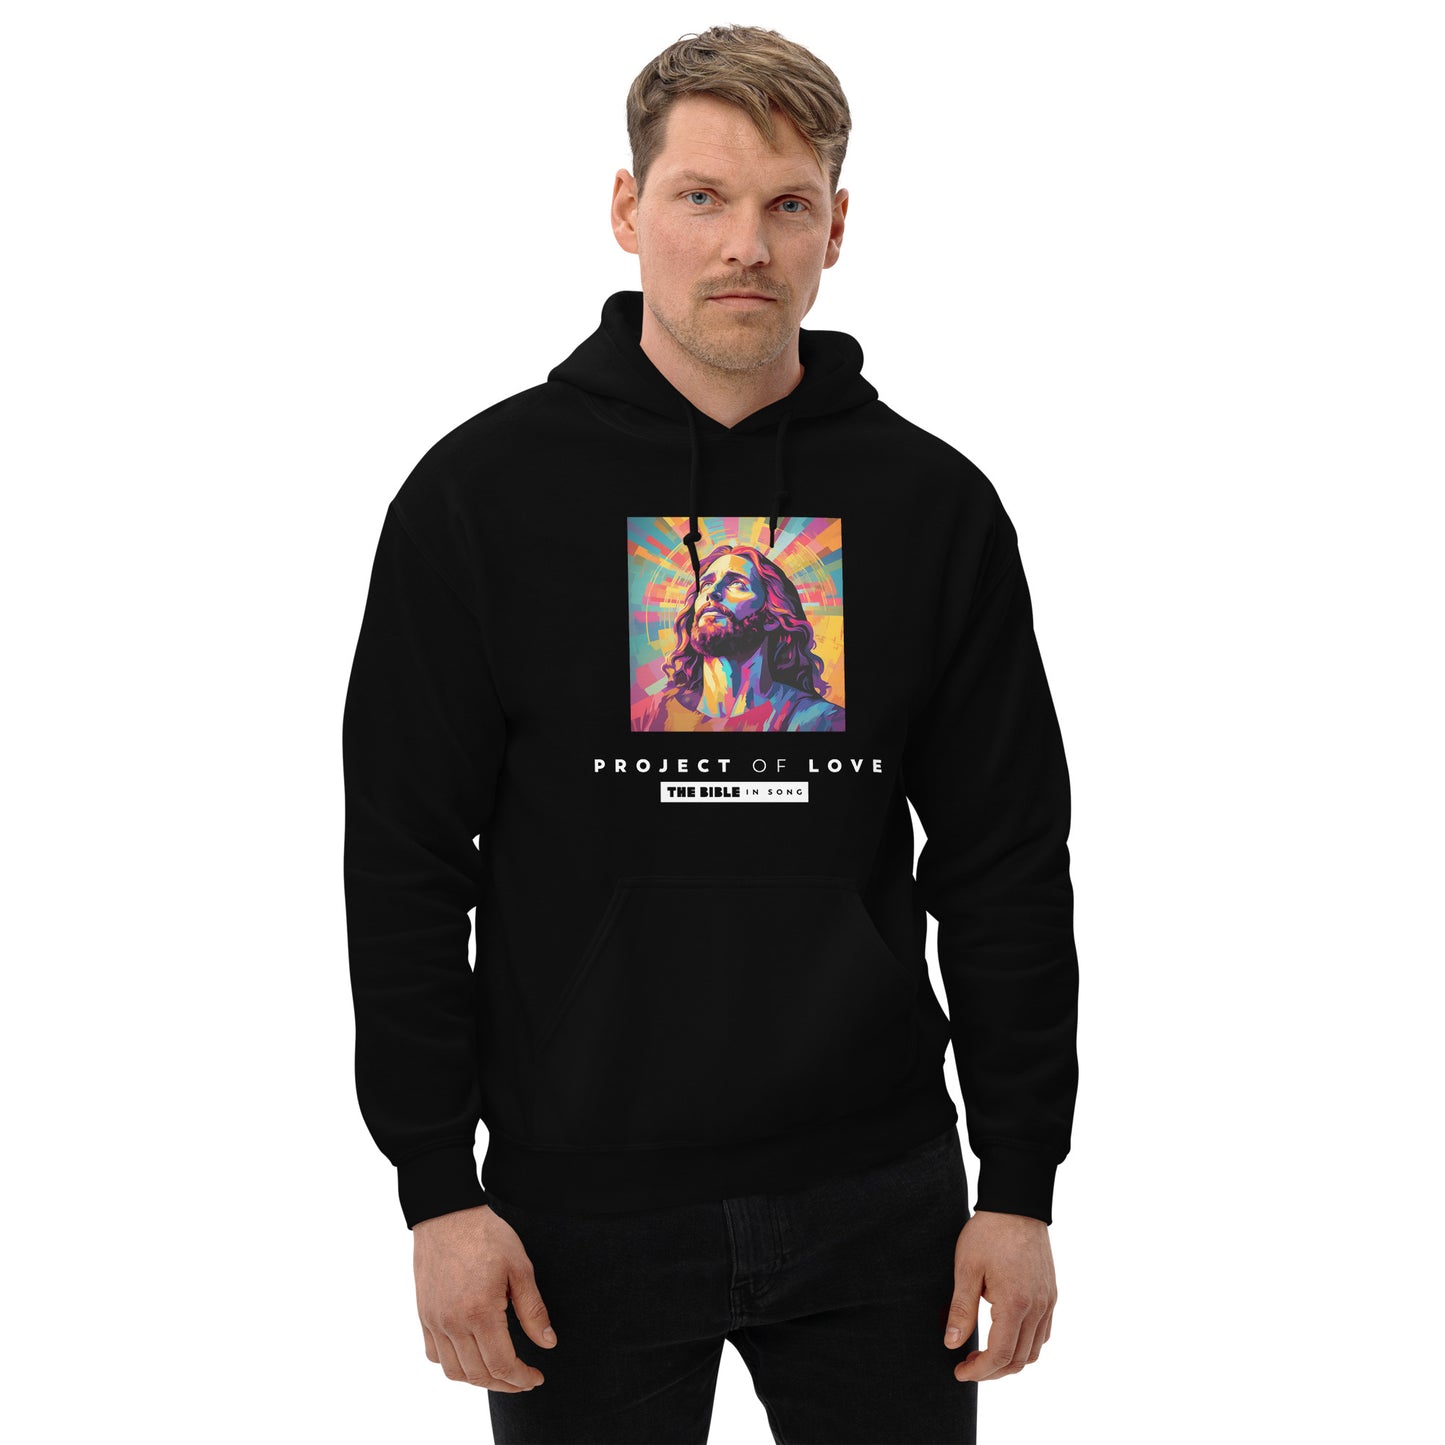 Hoodie Project of Love with print of Jesus